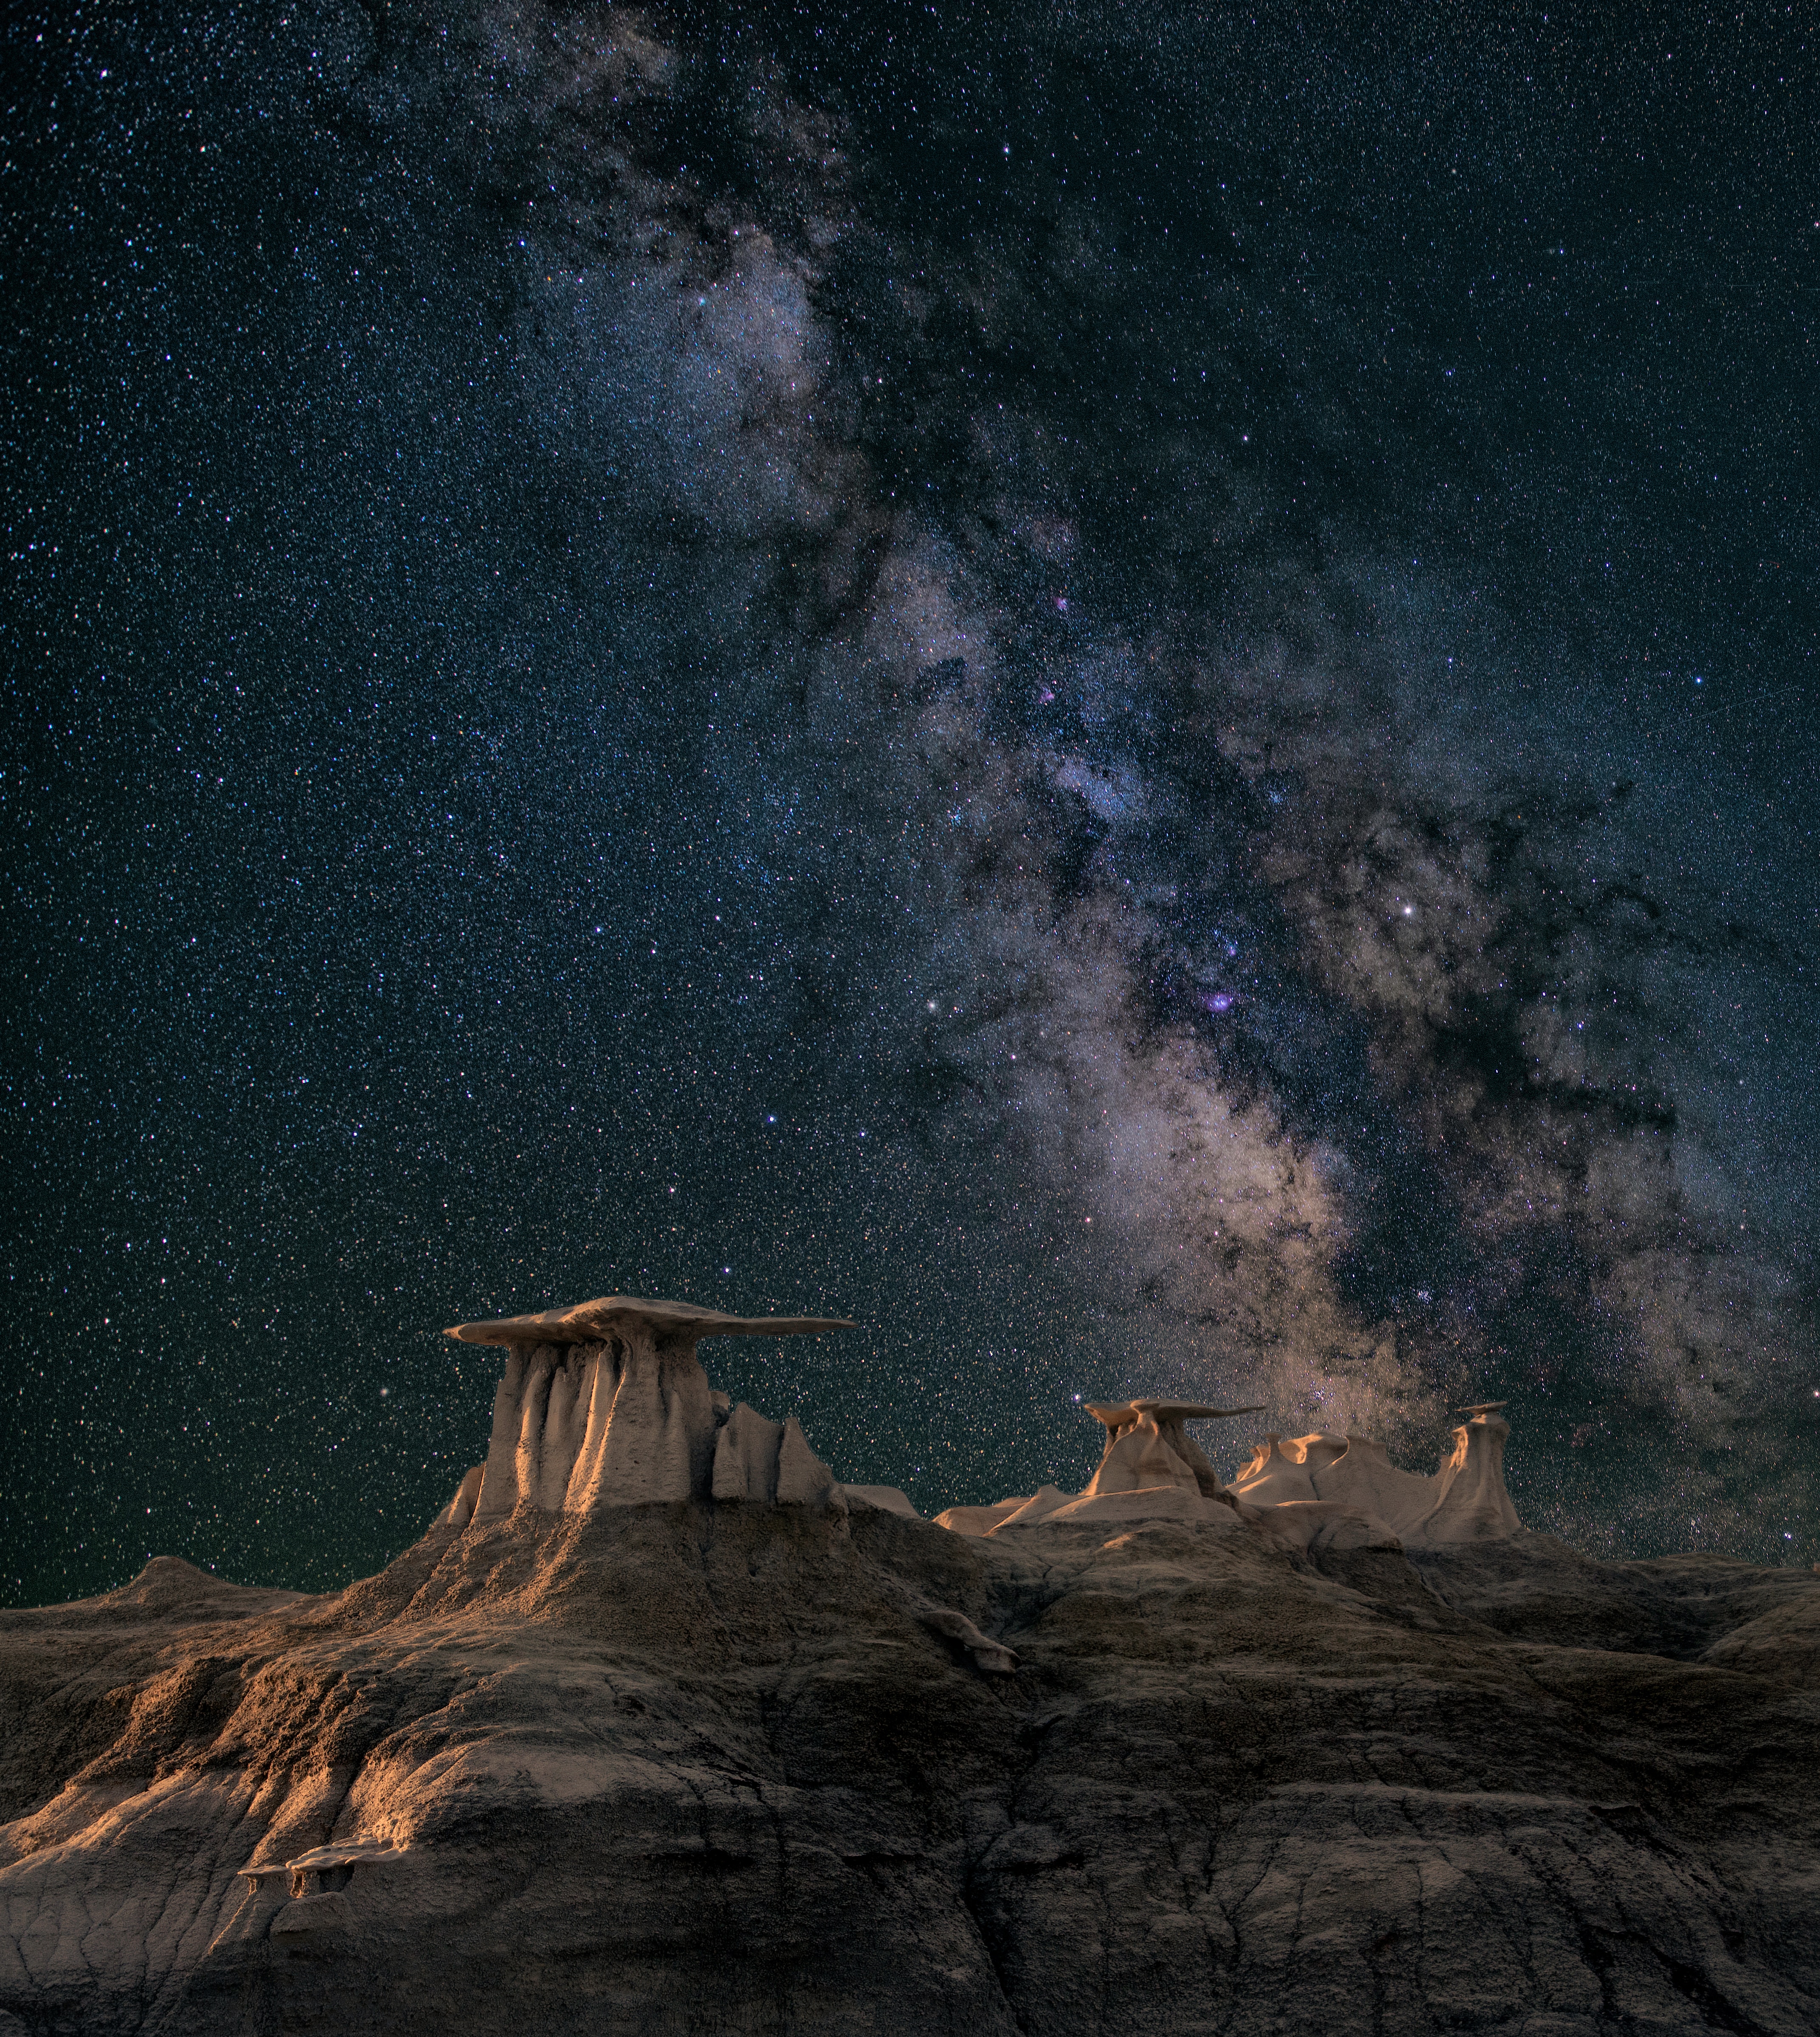 The Milky Way in a clear and starry night sky above unusual rock formations.